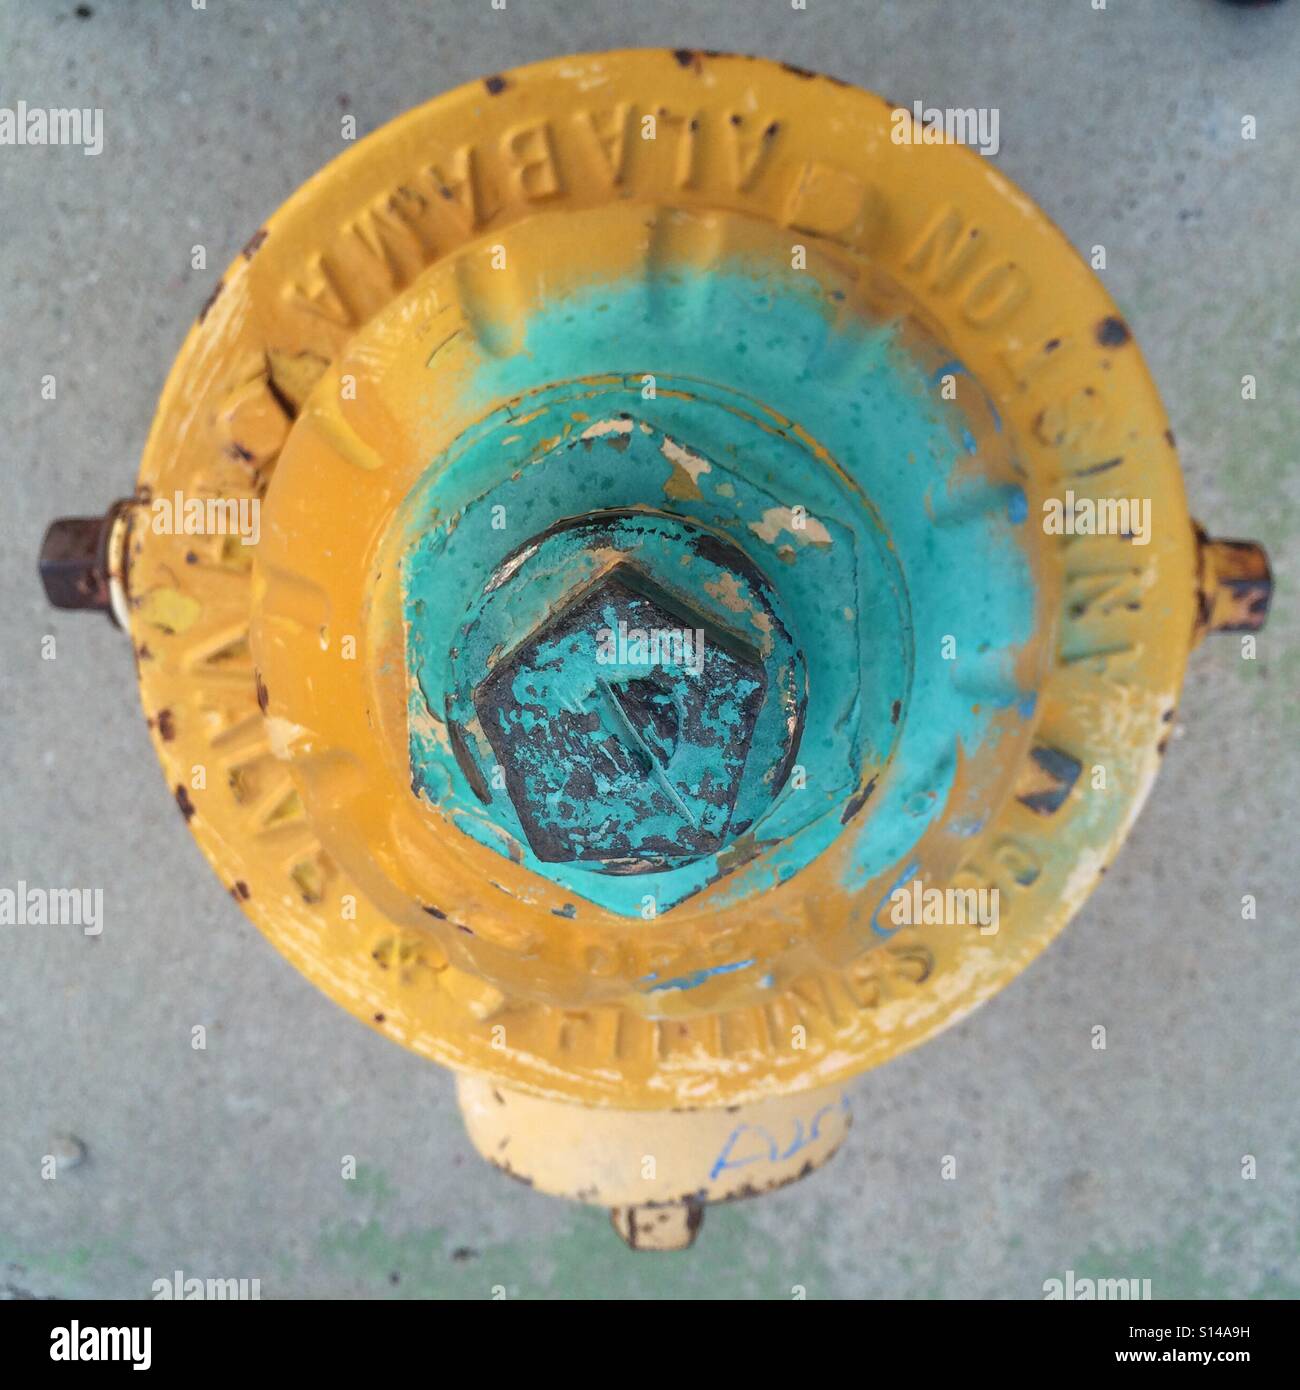 Fire hydrant with blue paint. Stock Photo